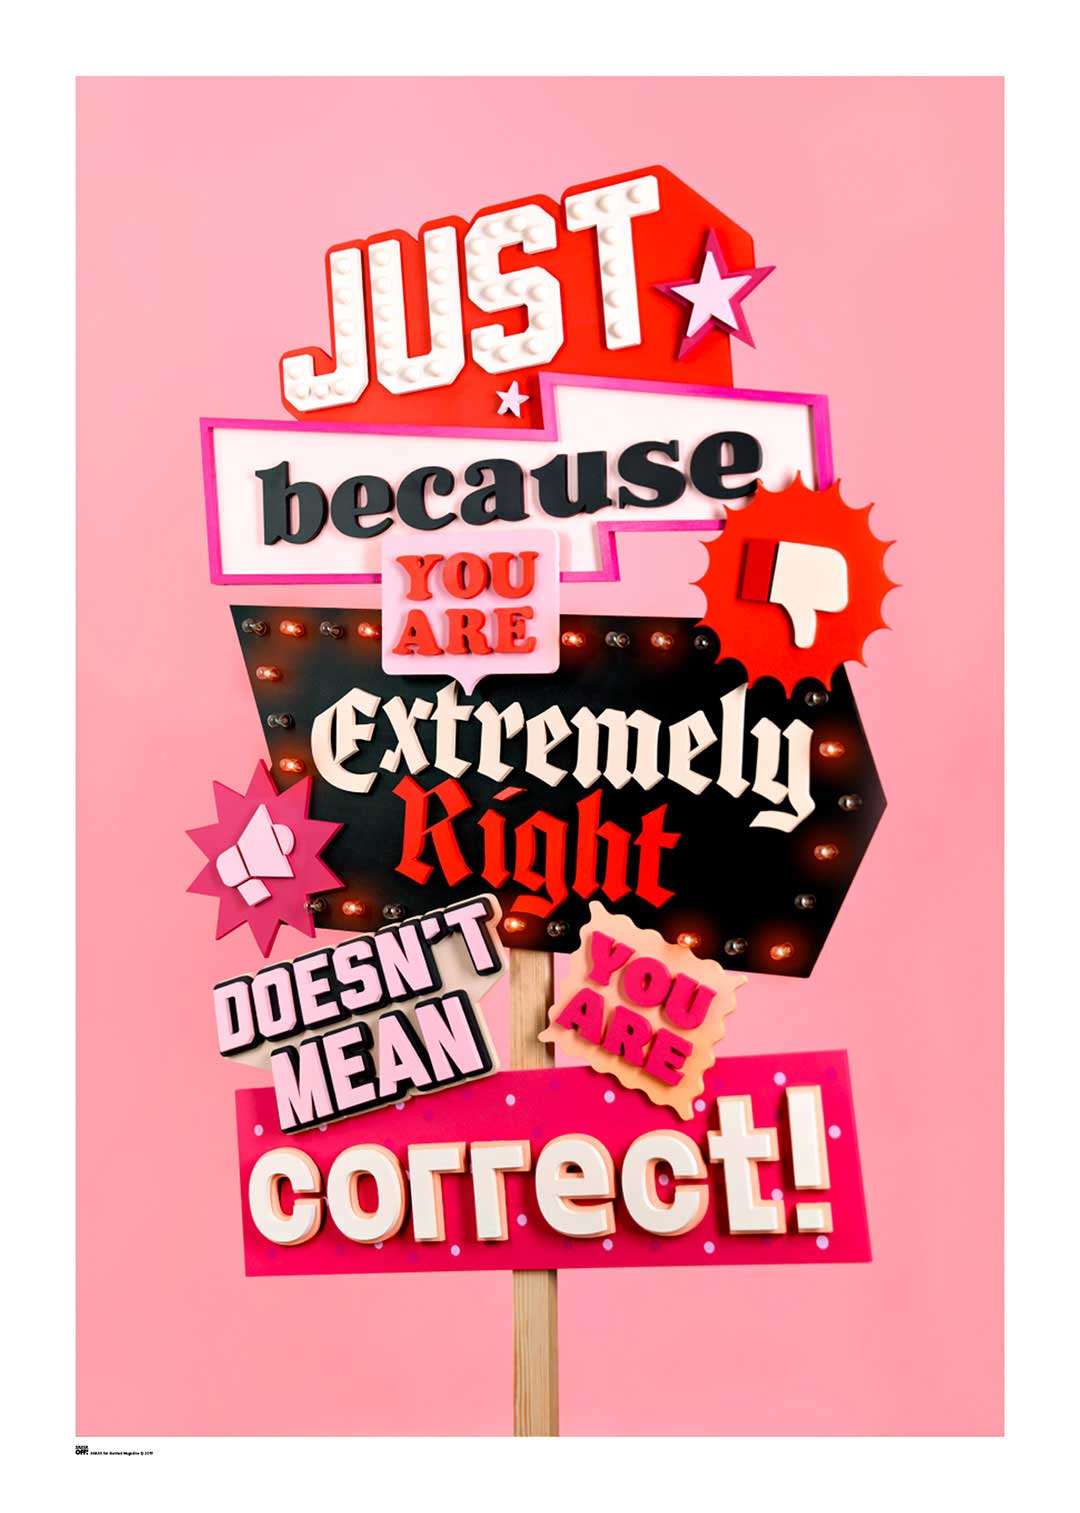 Image of Poster: “Just Because You Are Extremely Right Doesn’t Mean You Are Correct”